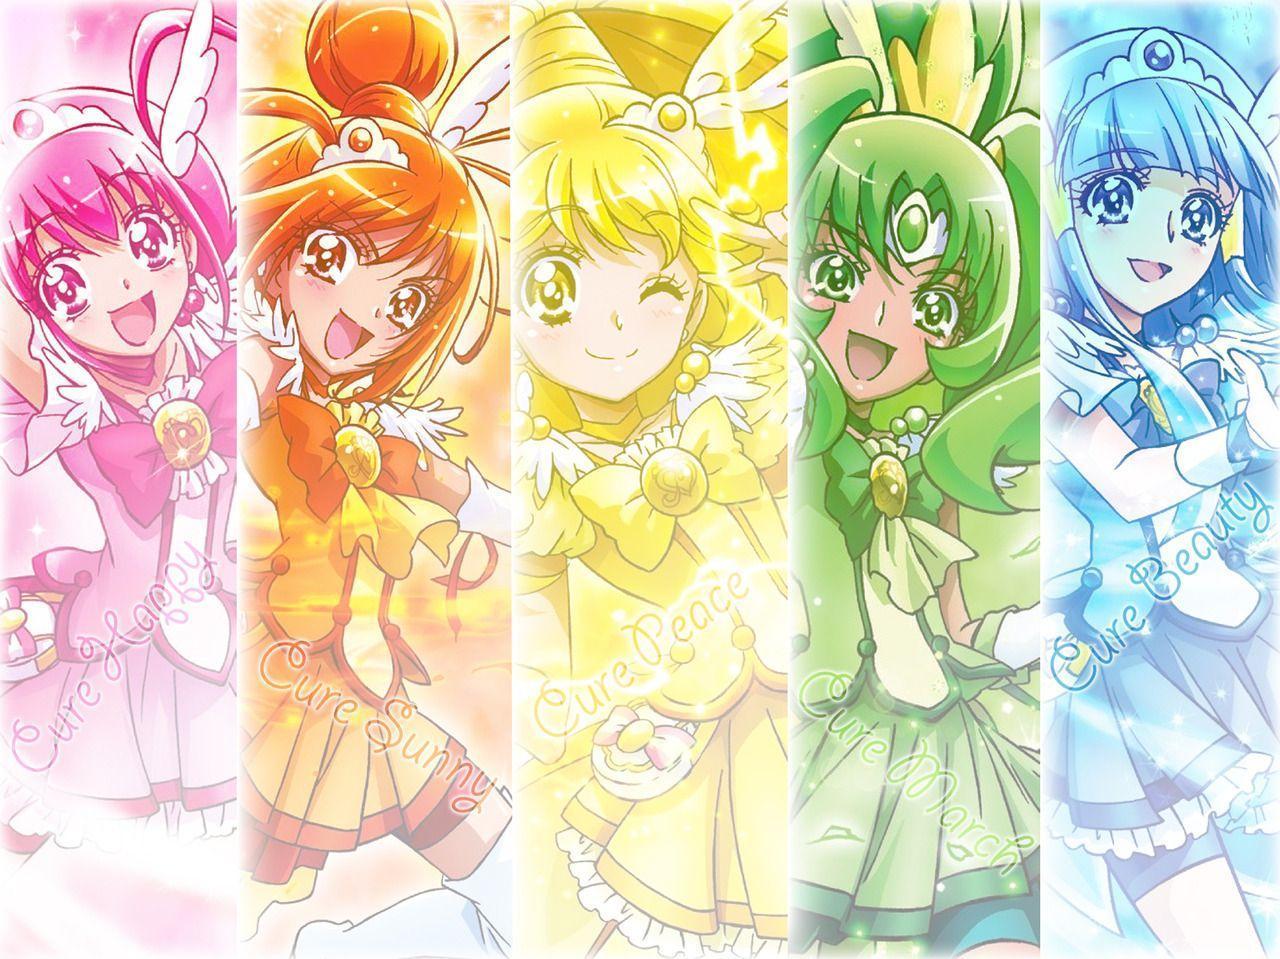 Glitter Force. Coming to Netflix December 2015. Animated